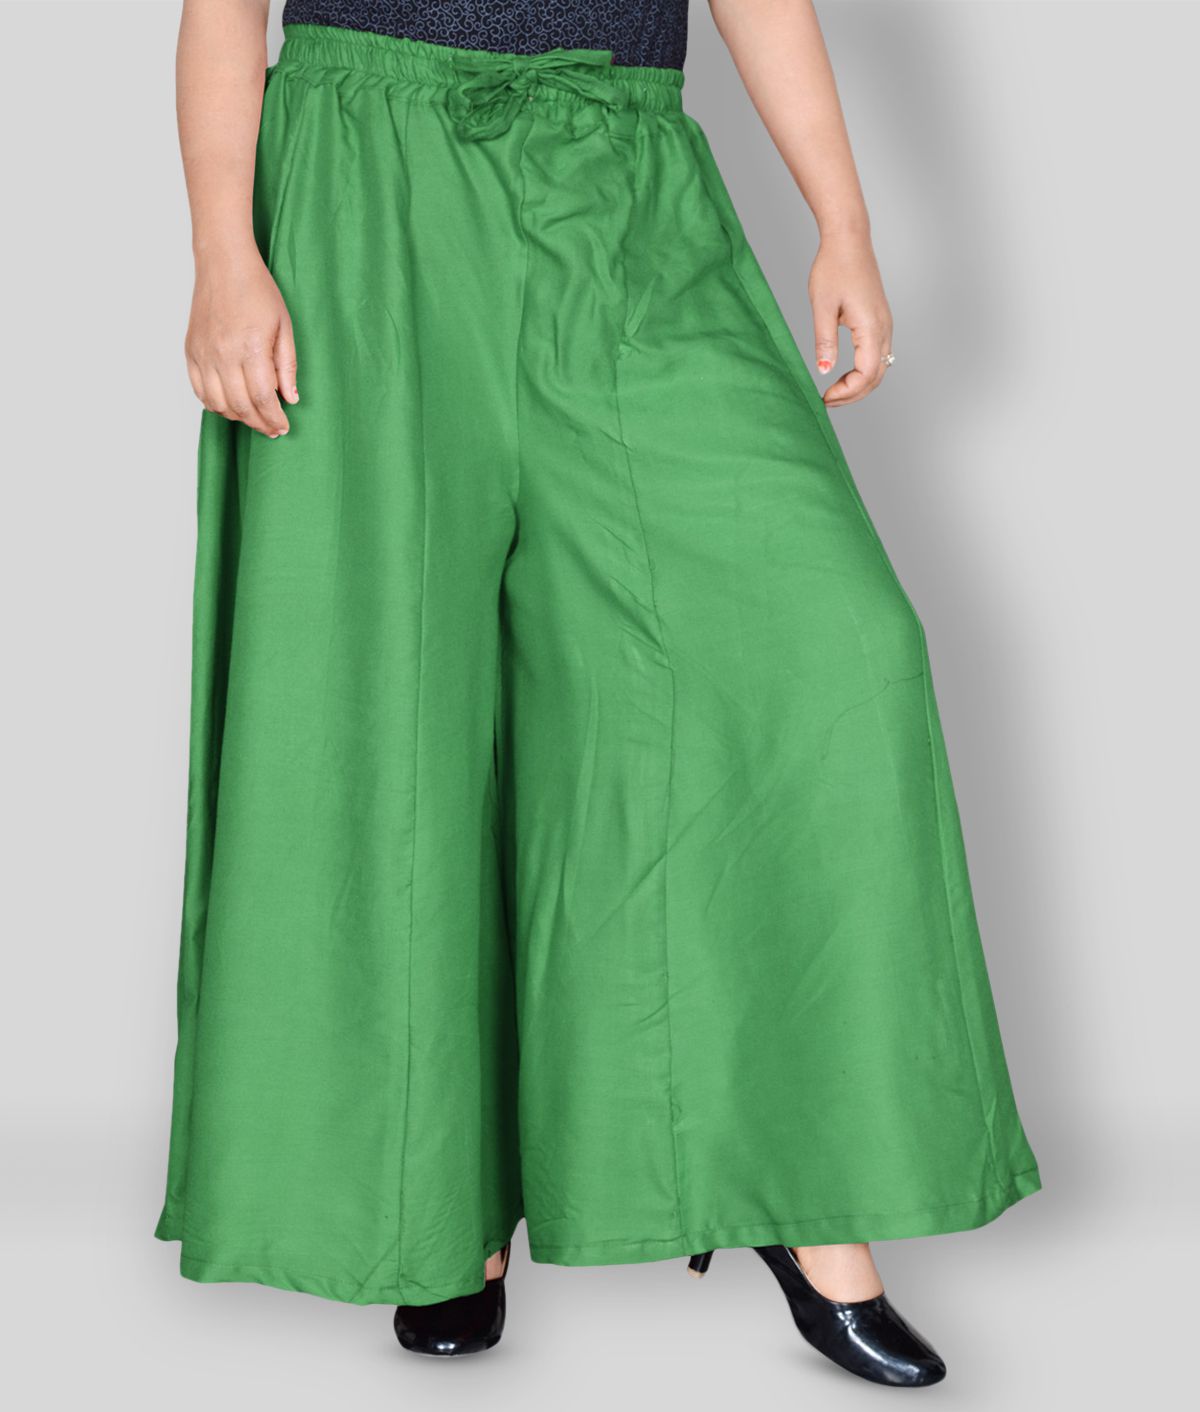 Sttoffa - Green Rayon Flared Women's Palazzos ( Pack of 1 )